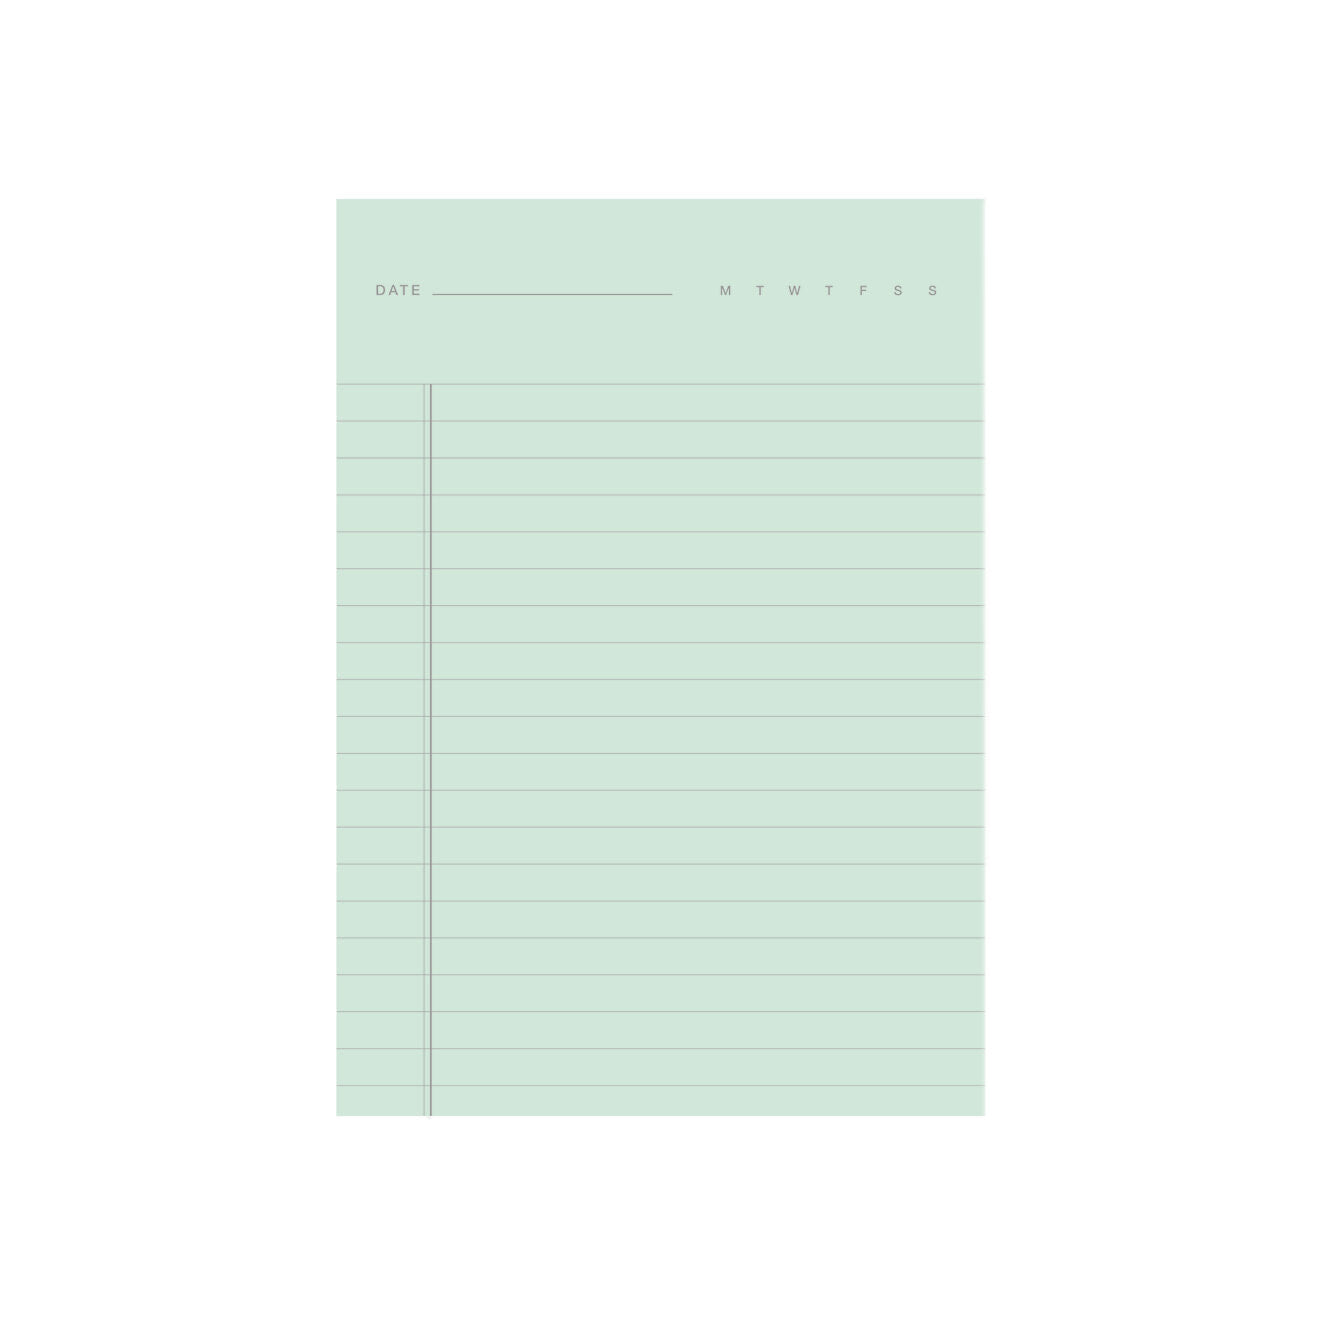  Green ruled sheet of 2-in-1 Notepad in Blue and Green by Before Breakfast. Grid and ruled sheets. Made in England and fountain pen friendly.